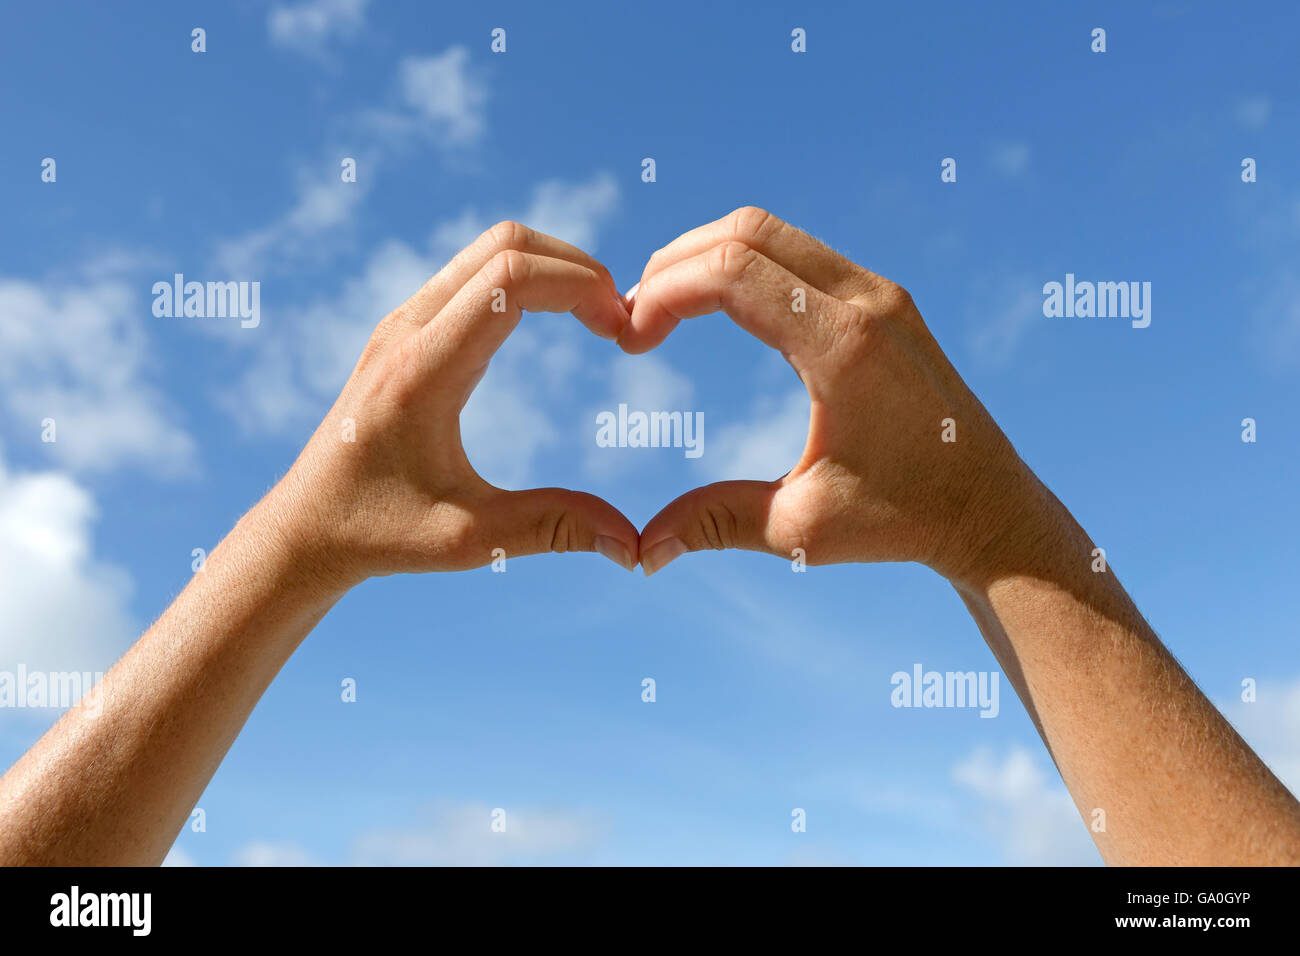 Female hands shows love sign in the air with blue sky Stock Photo